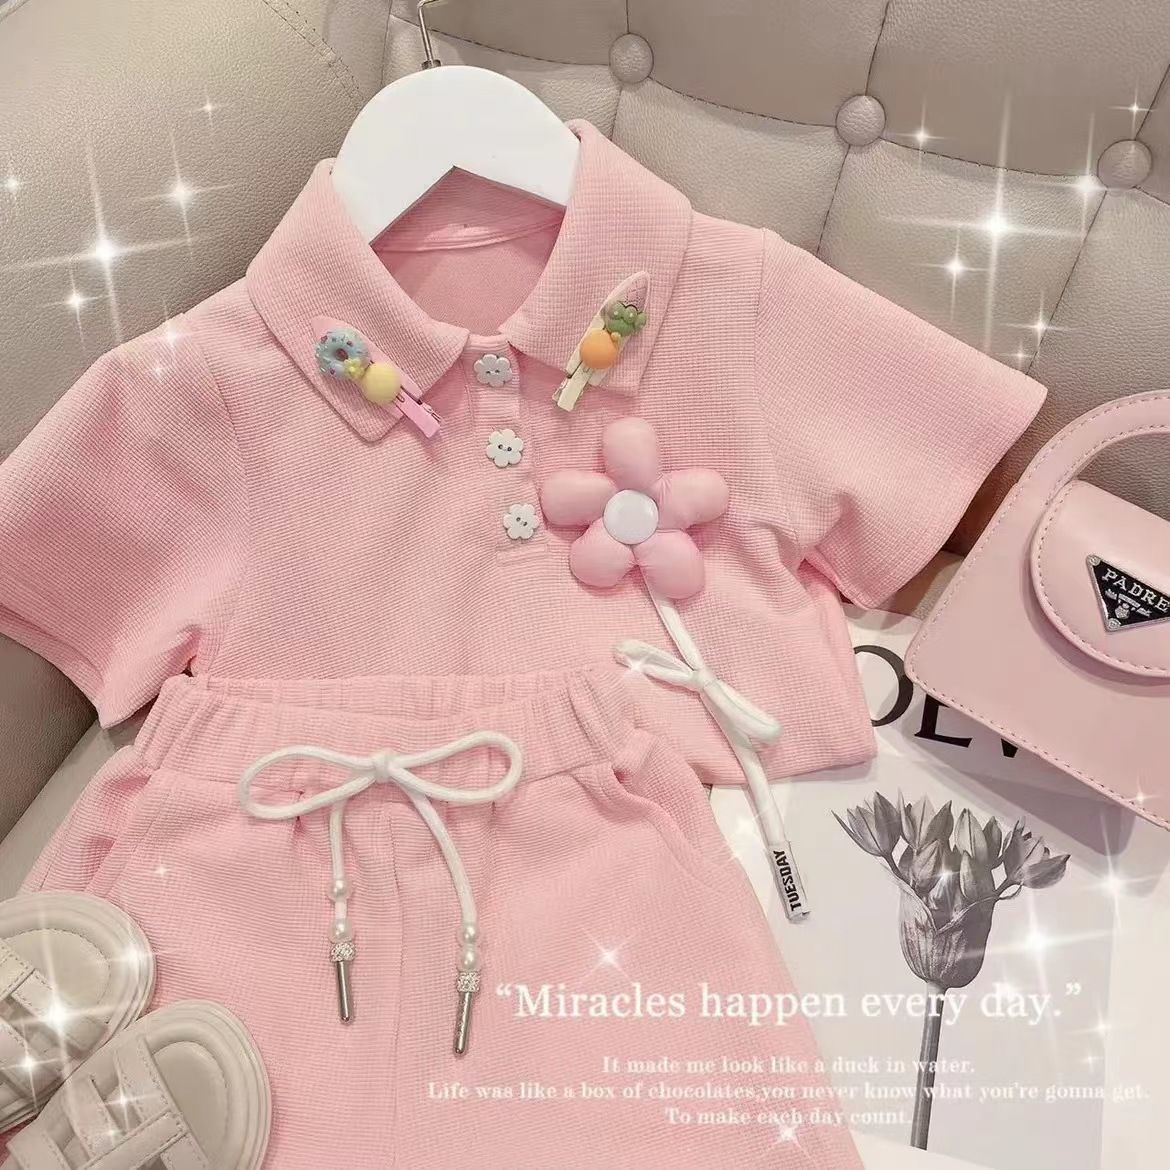 Girls' summer new suit 2022 hot style children's short-sleeved POLO shirt foreign style fashion girl baby summer shorts